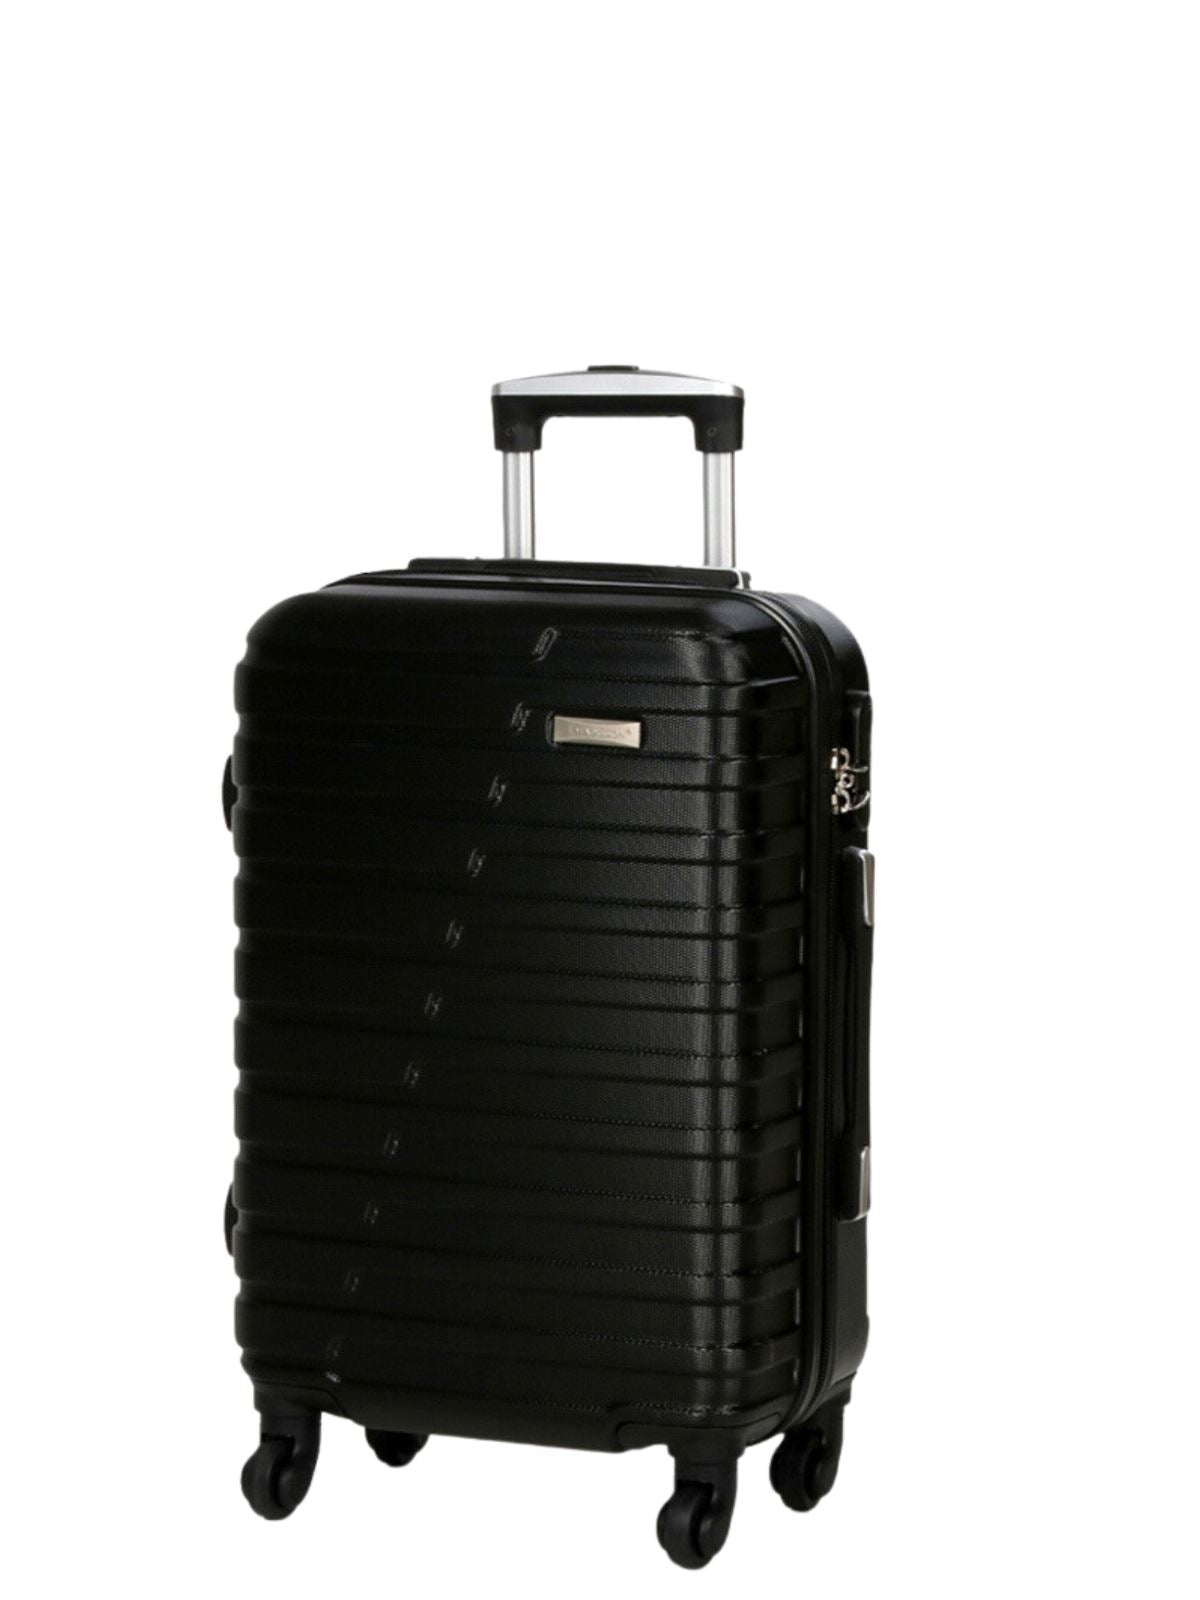 Robust Lightweight Black Hard shell Suitcase 4 Wheel Luggage - Upperclass Fashions 